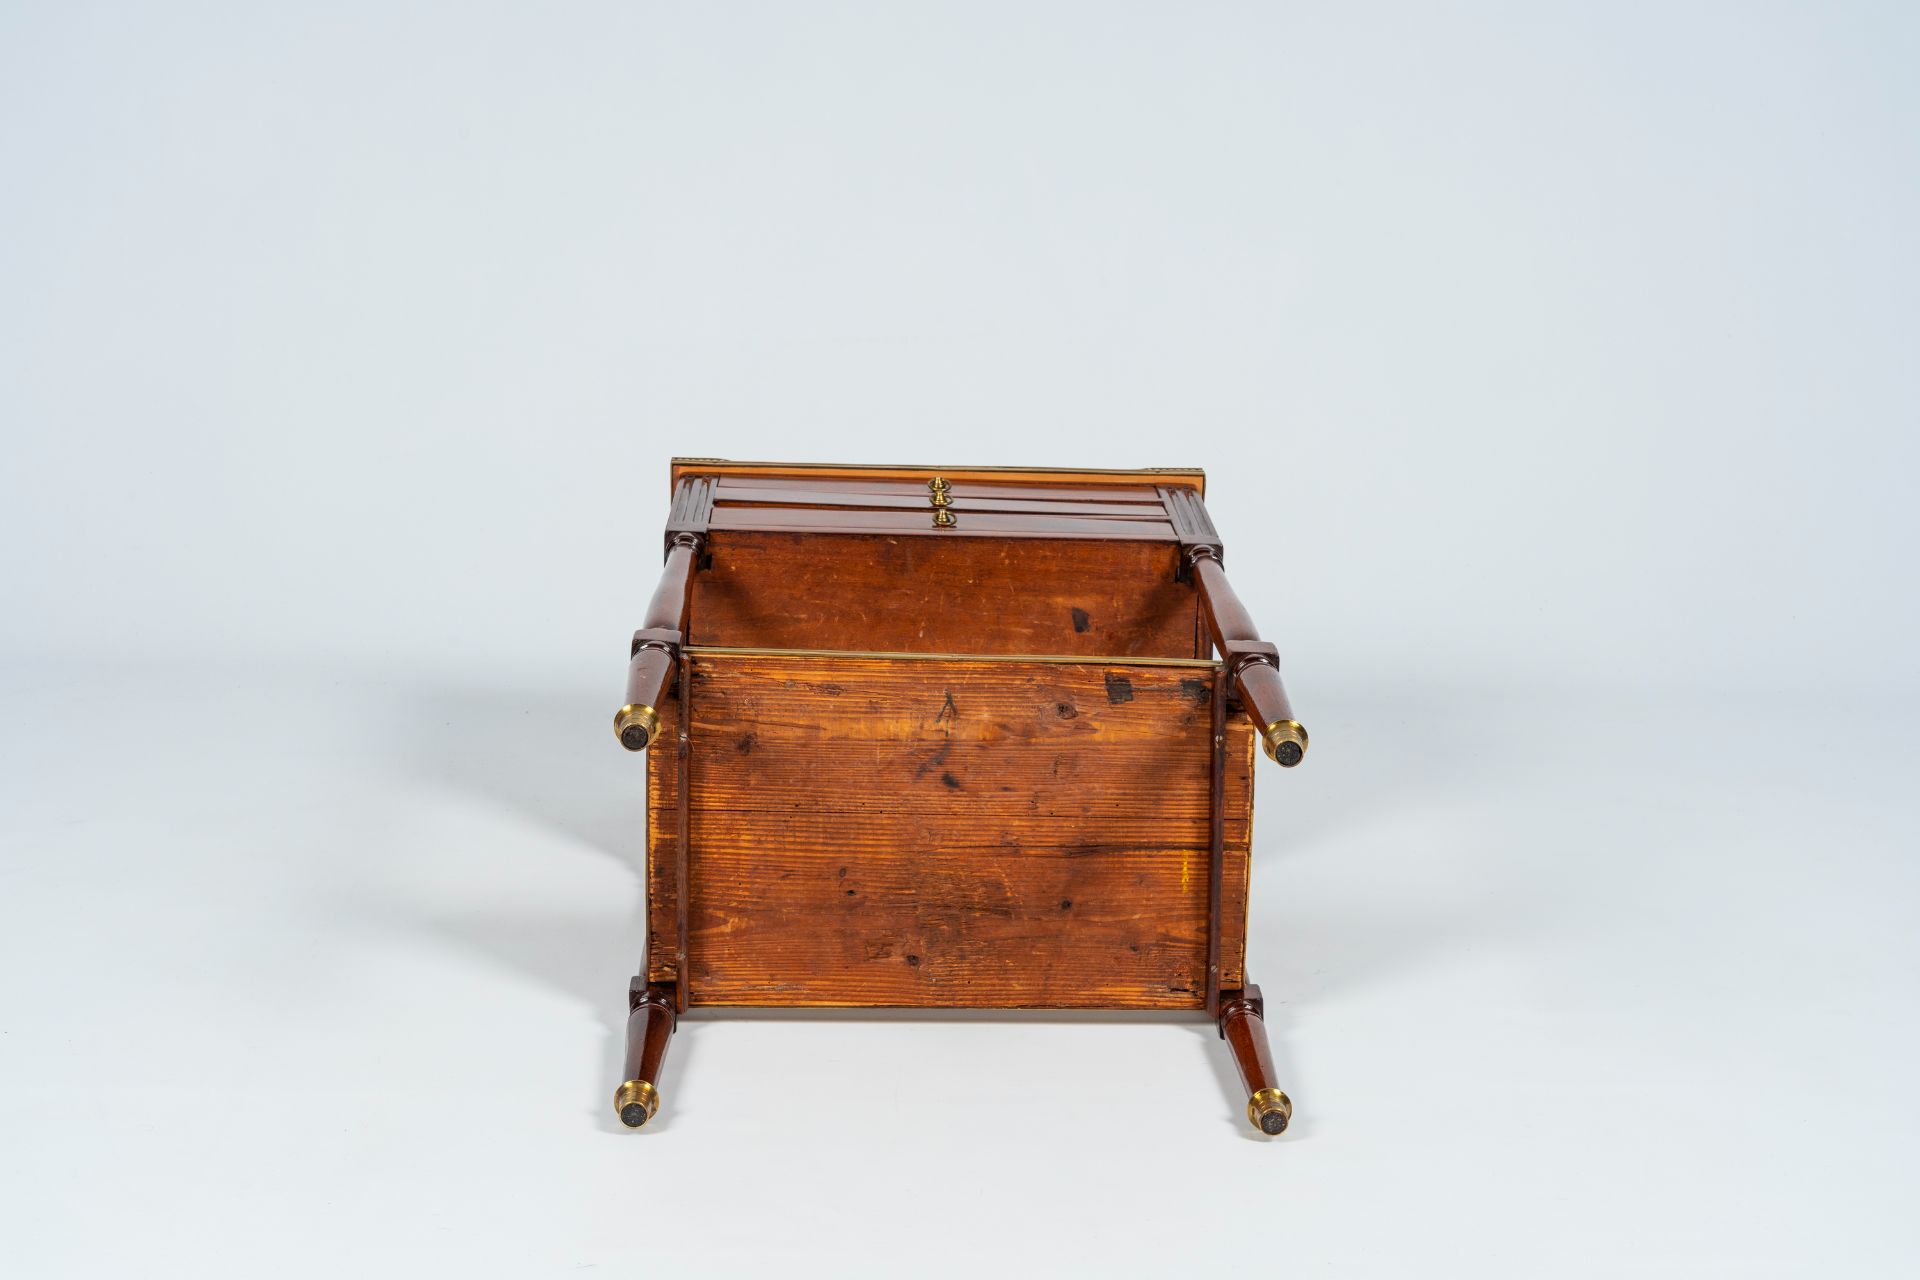 A French mahogany gilt brass mounted side table with three drawers, late 19th C. - Image 8 of 8